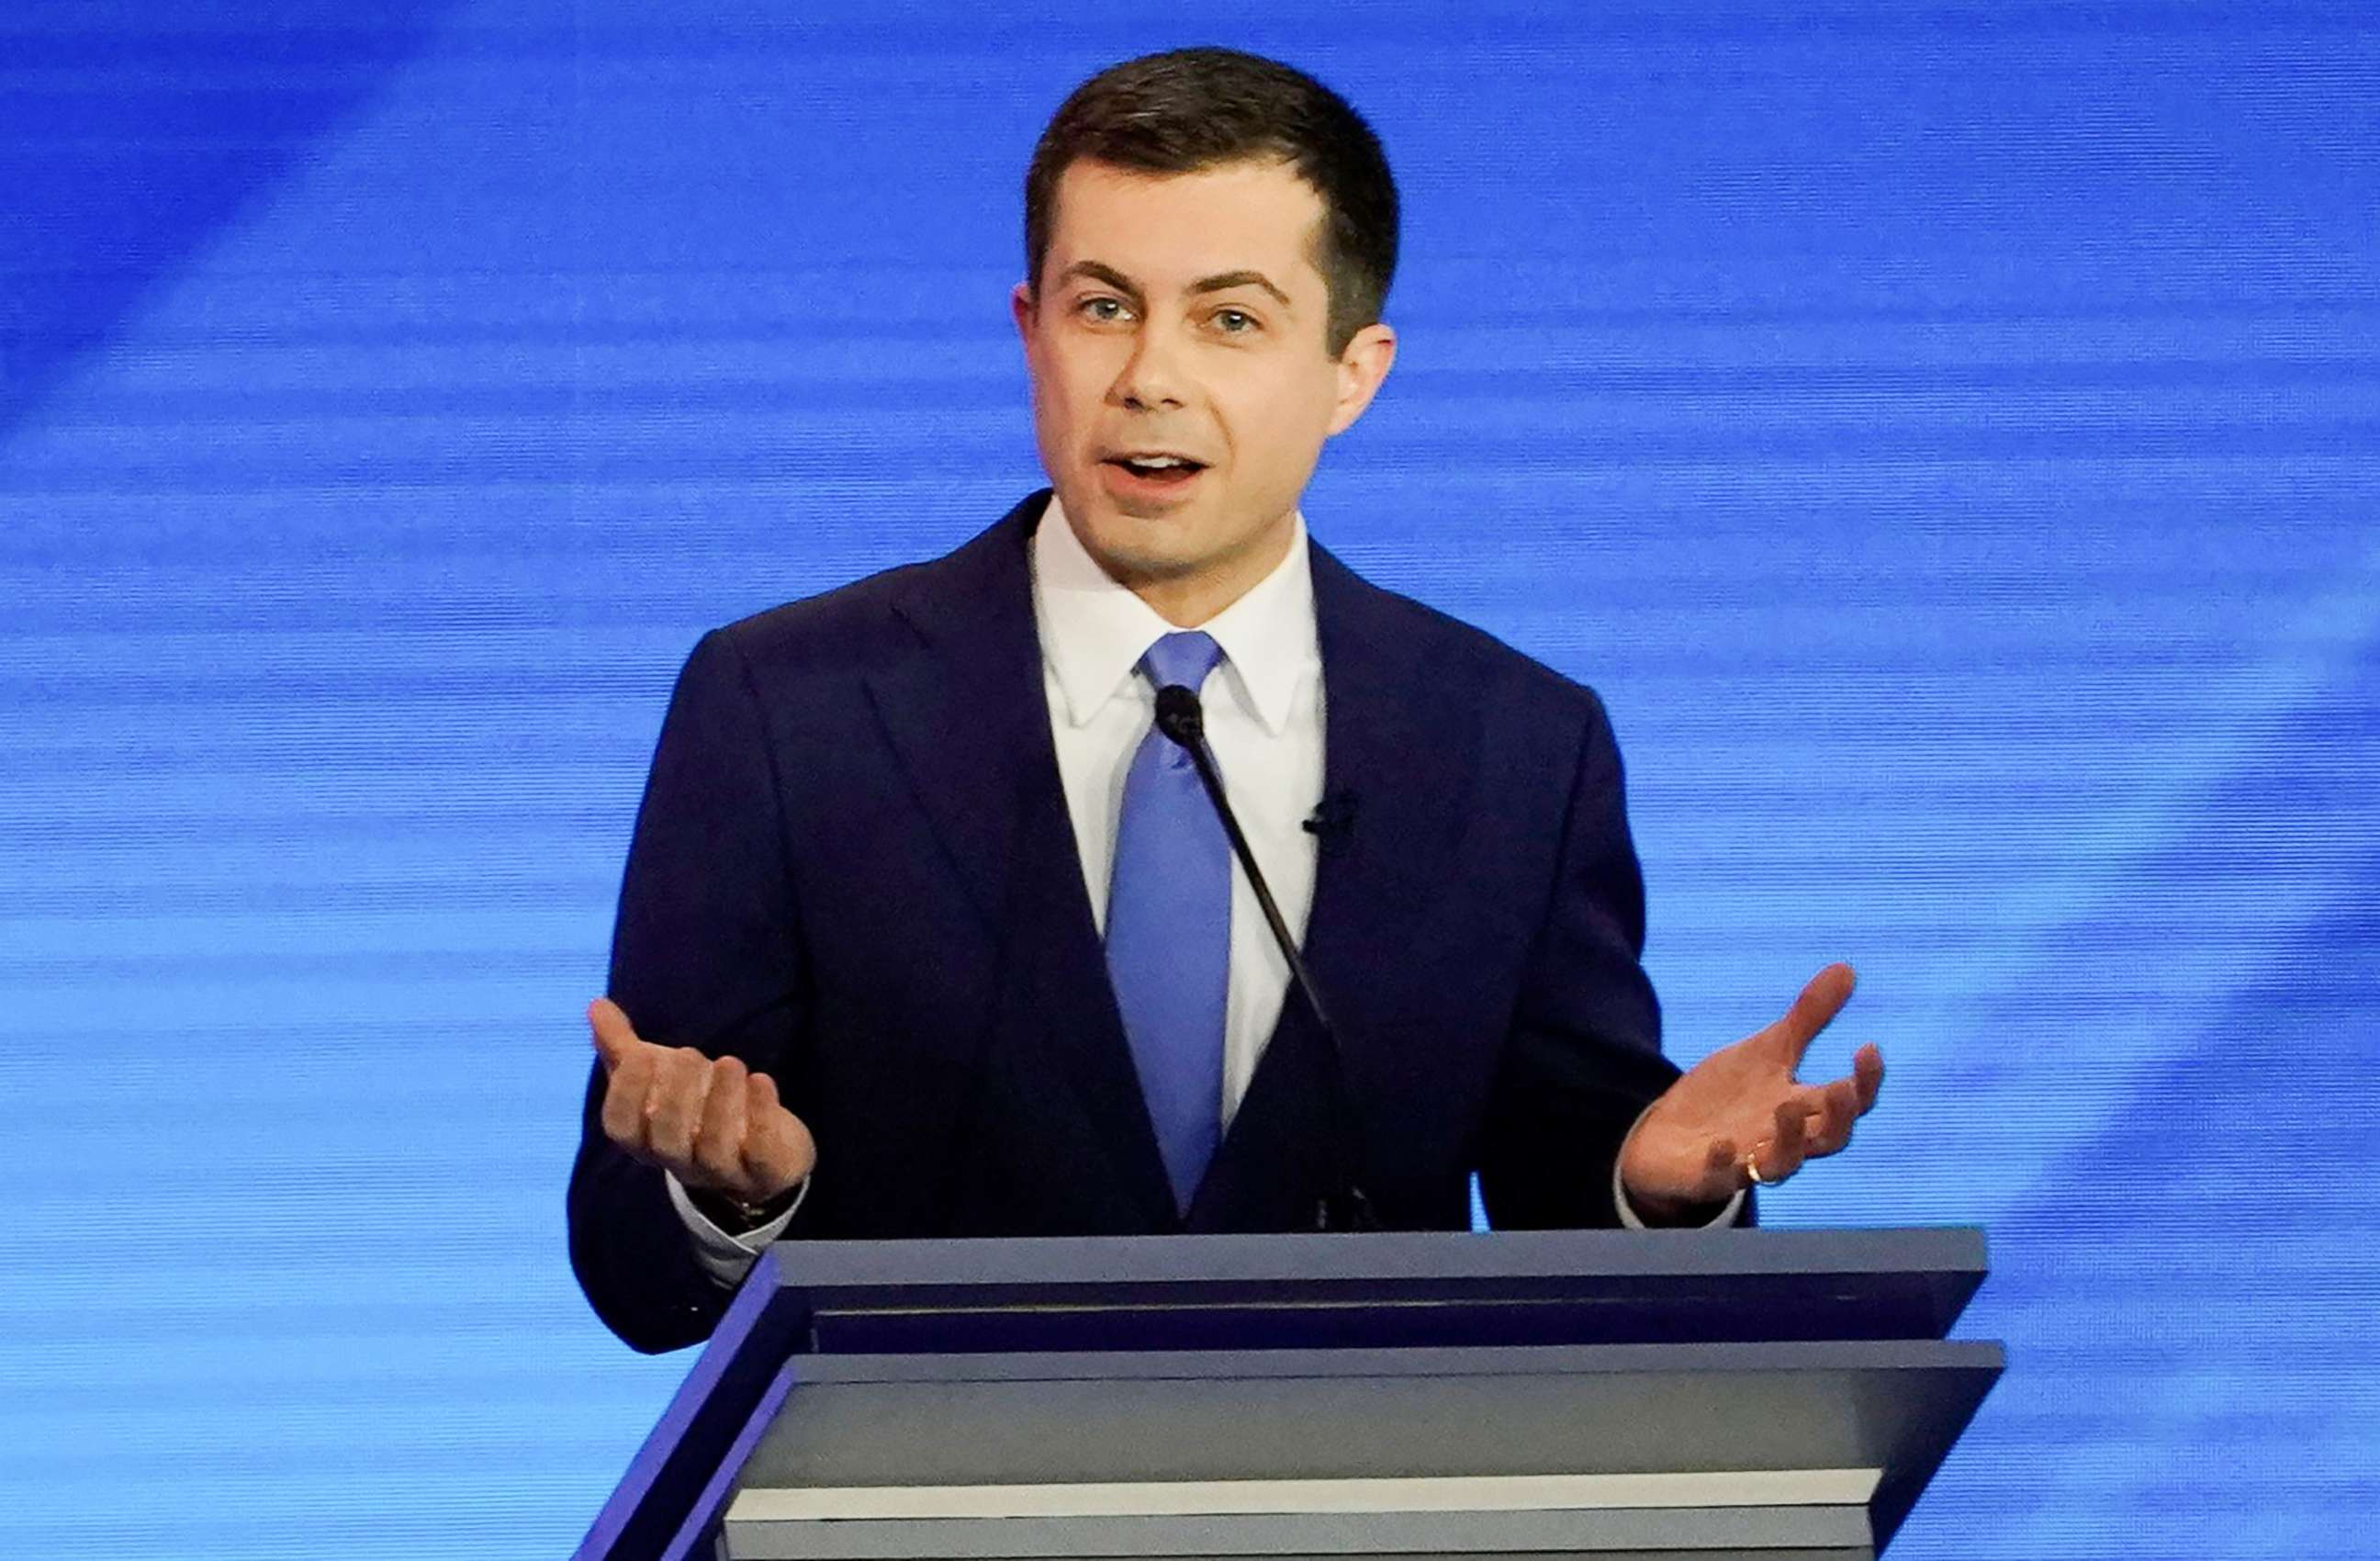 PHOTO: Former South Bend Mayor Pete Buttigieg participates in the eighth Democratic 2020 presidential debate at Saint Anselm College in Manchester, New Hampshire, U.S., February 7, 2020.